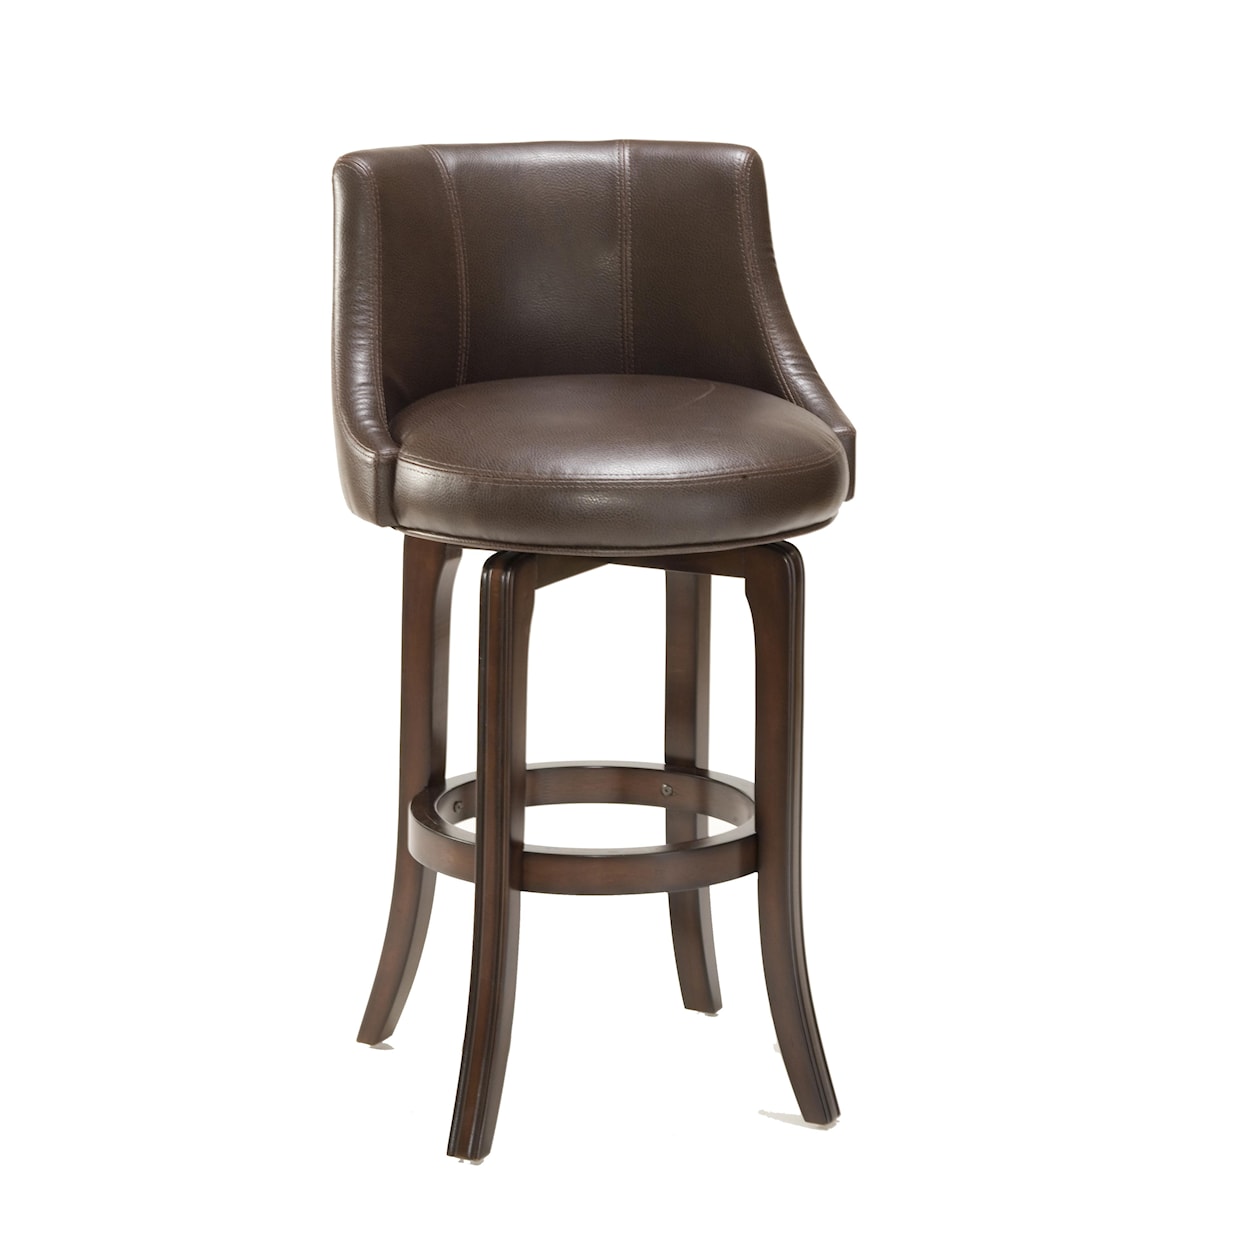 Hillsdale Napa Valley Napa Valley Counter Stool - Brown Leather